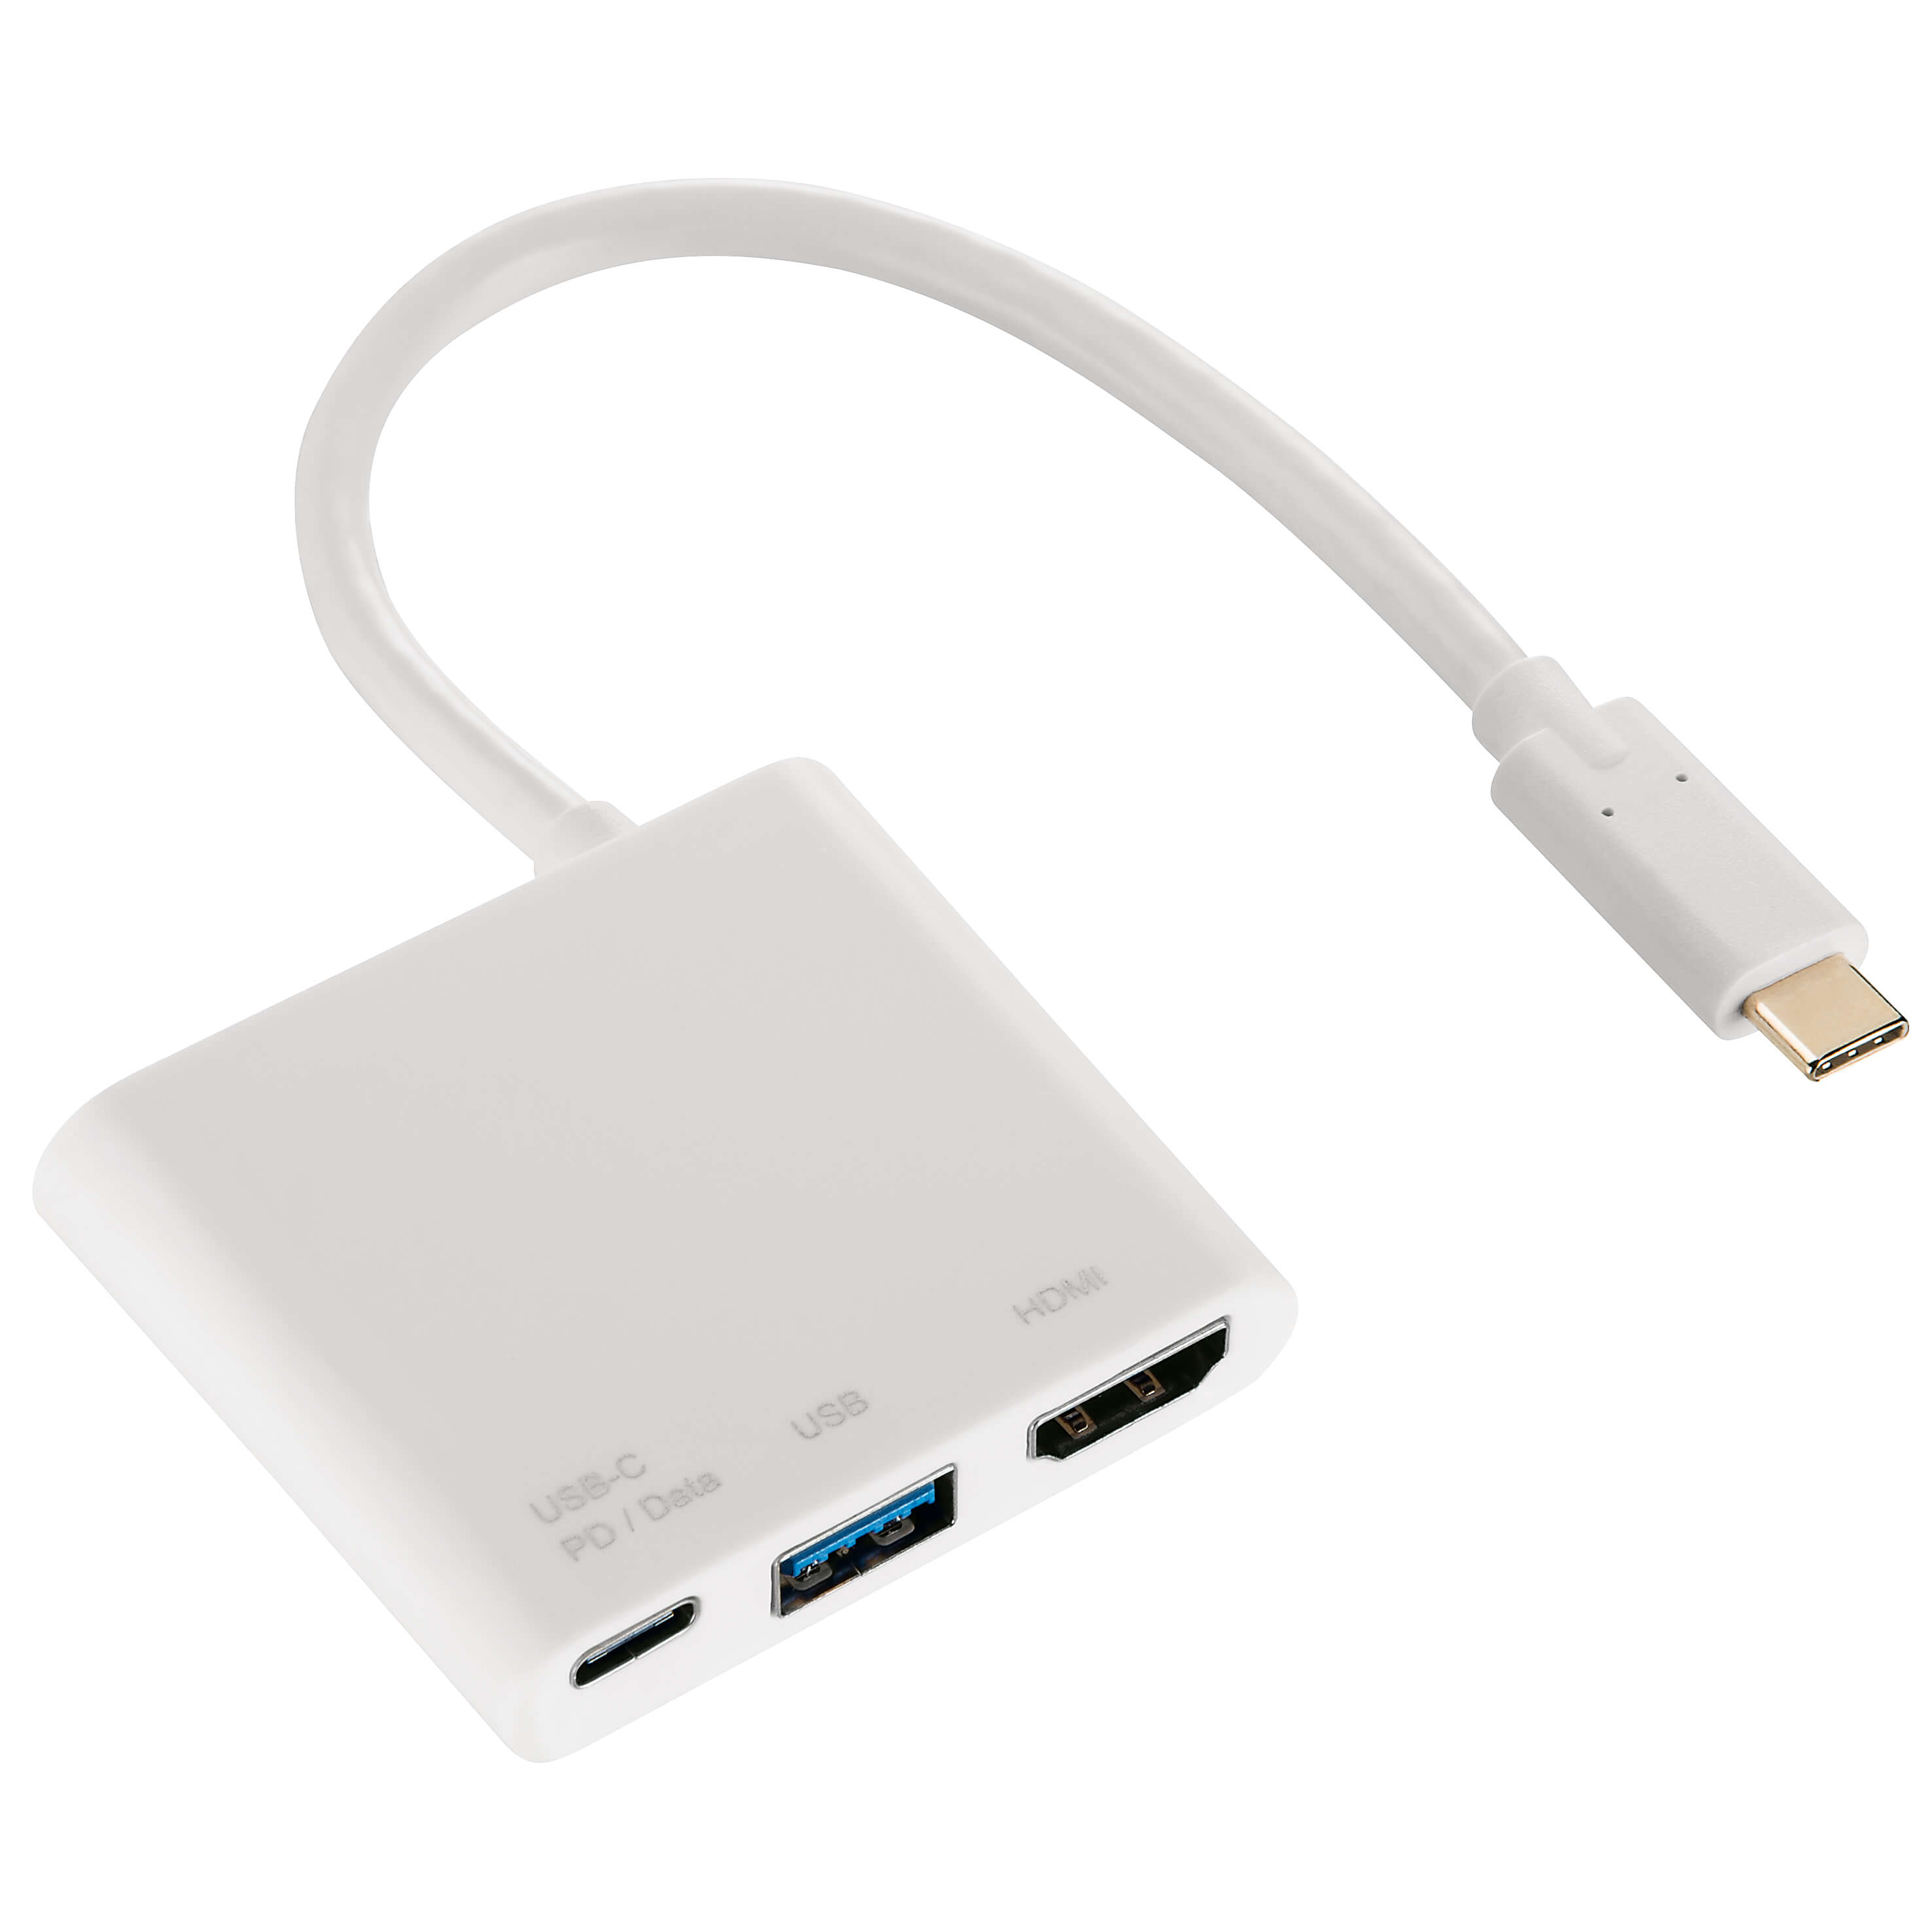 HAMA 3in1 USB-C Multiport Adapter for USB 3.1 HDMI™ and USB-C